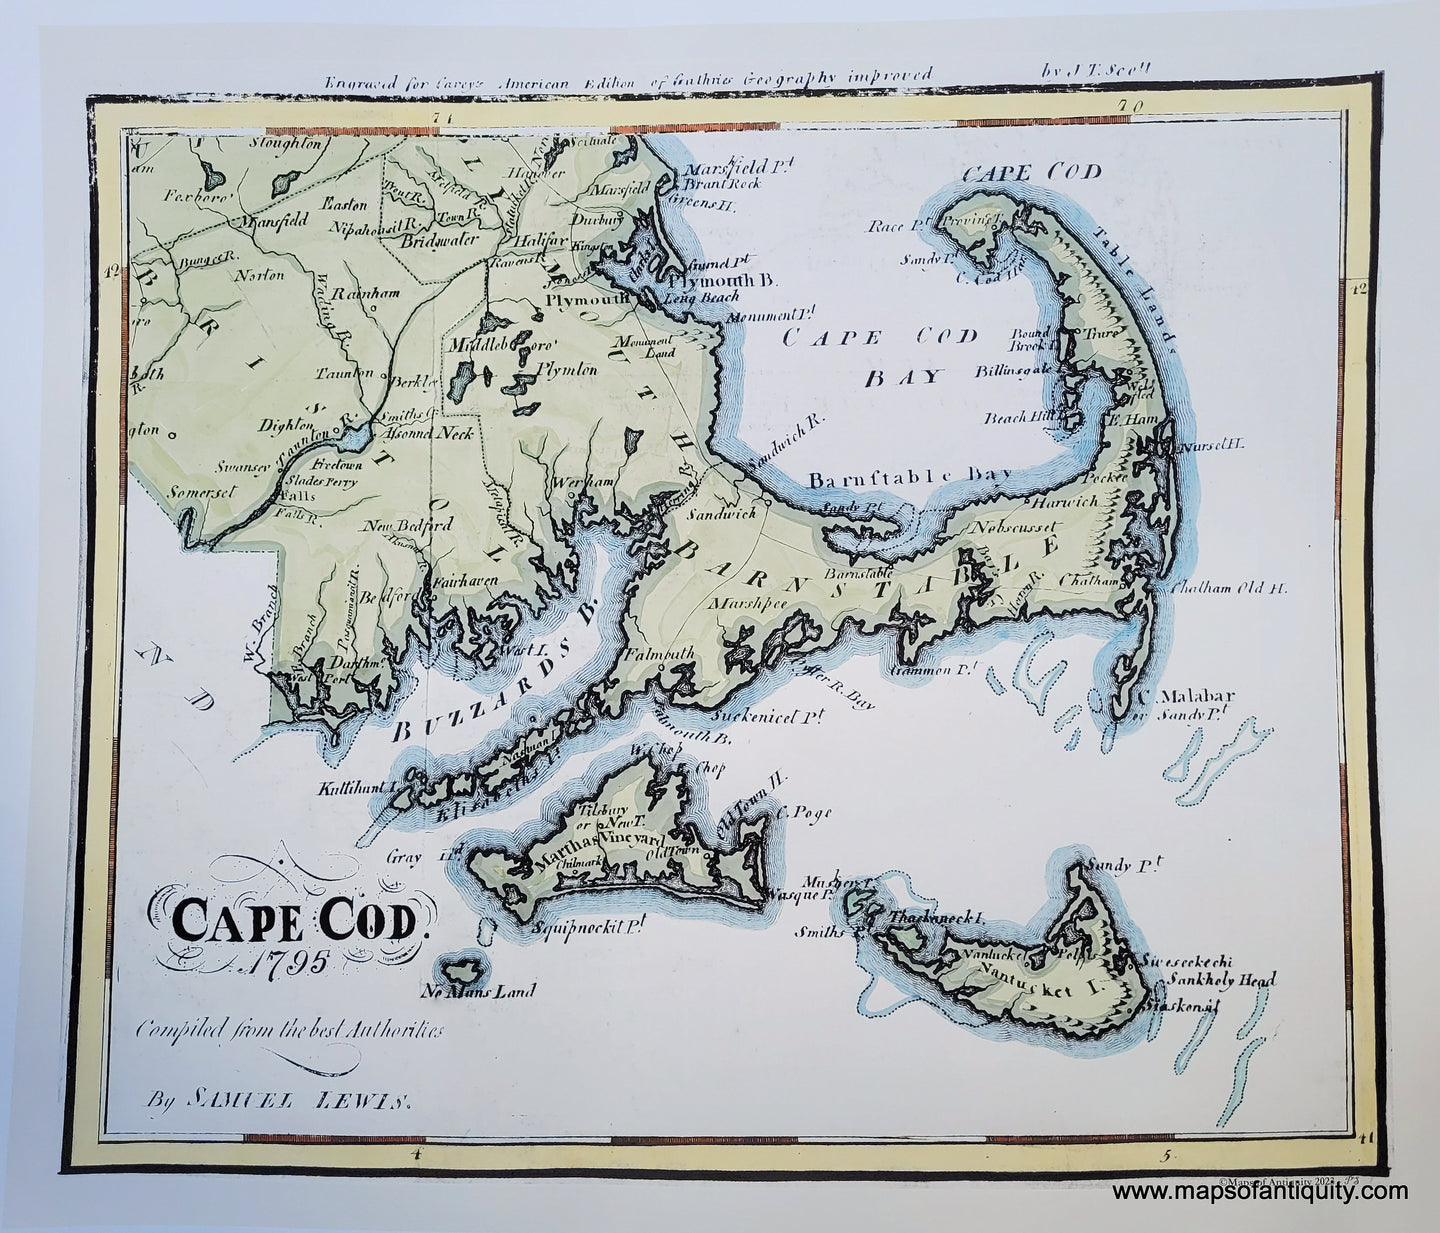 Hand-colored Reproduction of Cape Cod, Martha's Vineyard, and Nantucket with Plymouth and Bristol counties, Massachusetts. Colored with blue along the shore and shoals and green in the land, border is yellow and red. All colored are in historical tones appropriate to the subject. -Cape-Cod-1795-by-Samuel-Lewis---Maps-Of-Antiquity